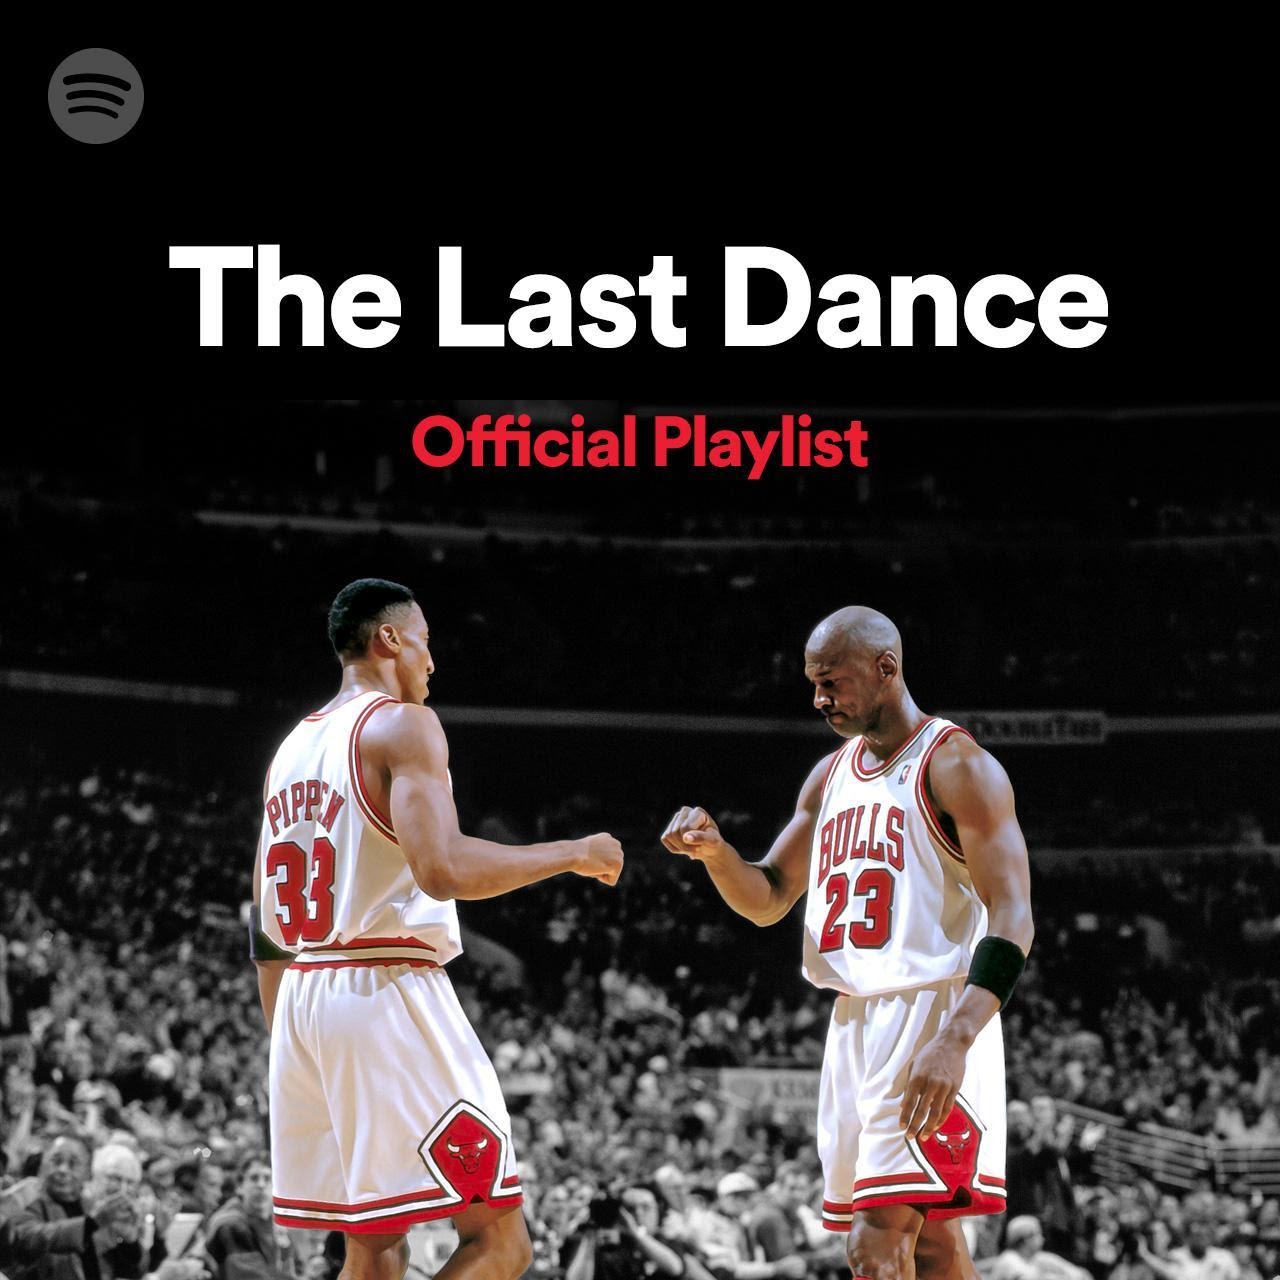 LISTEN: Spotify, Netflix and ESPN Partner to Bring Awesome Curated Playlists of THE LAST DANCE in the Music Streaming Platform 